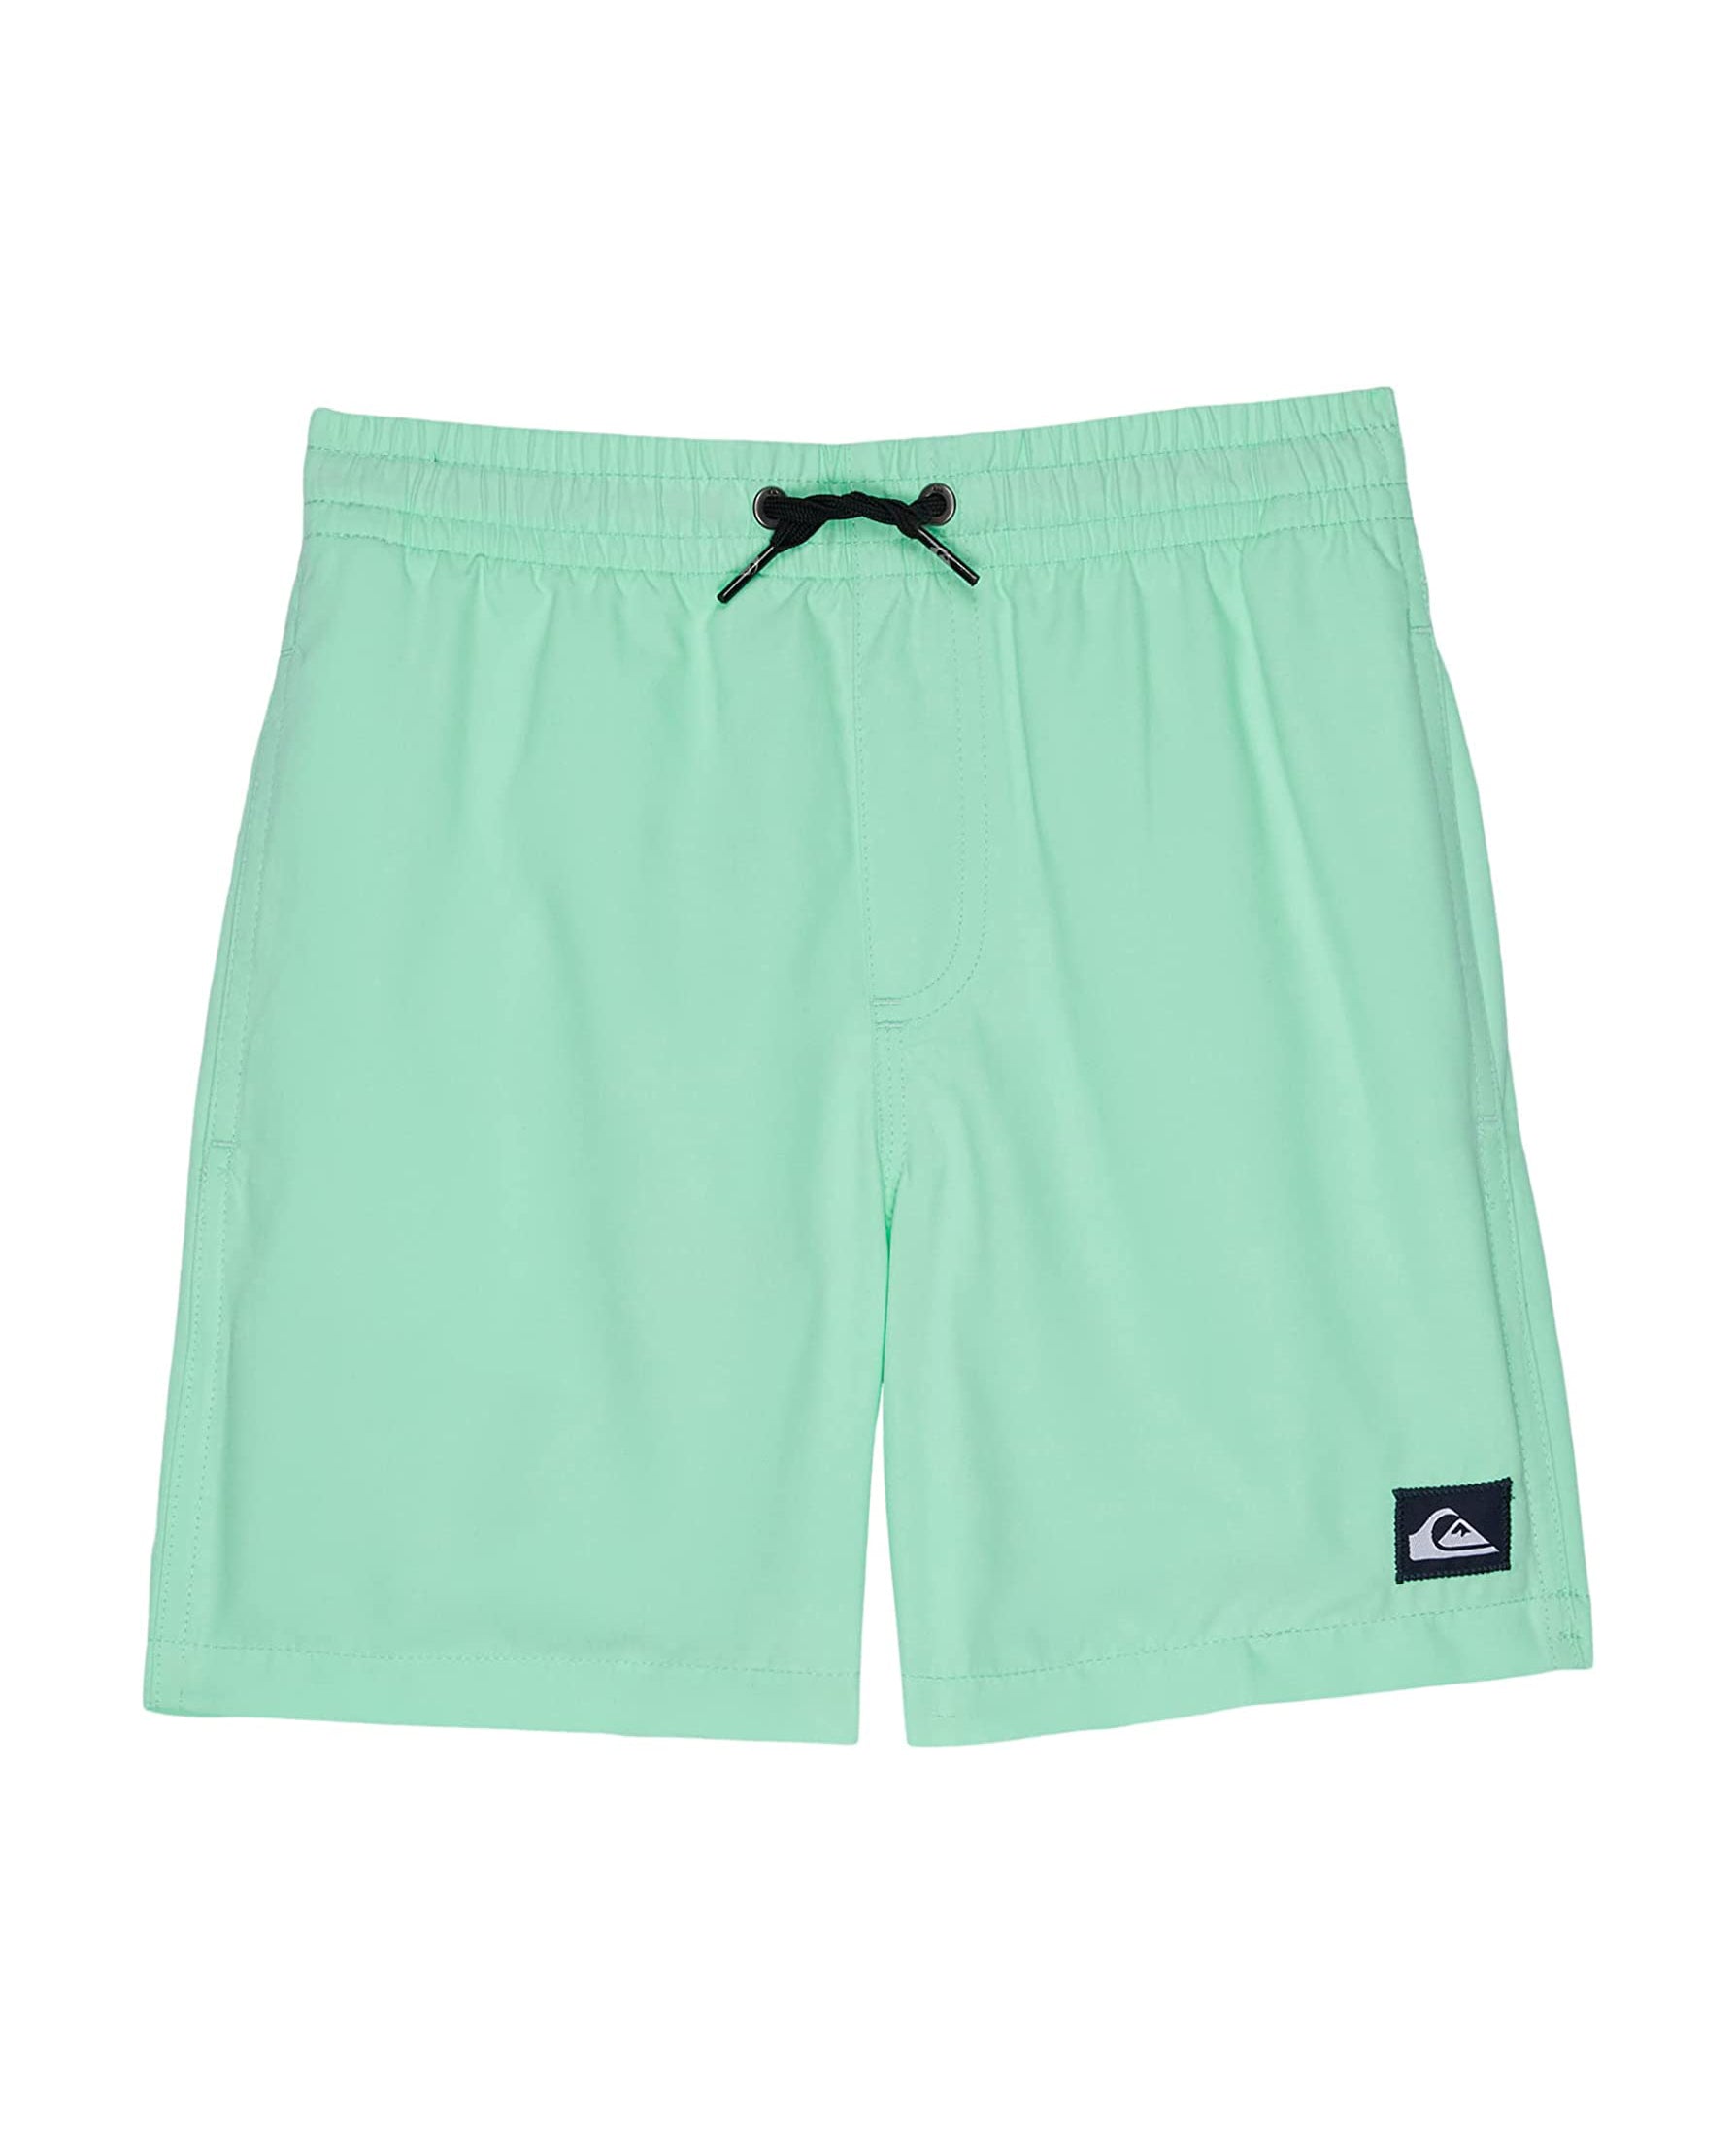 Quiksilver Boys 2-7 Mix Volley GCZ0 7X